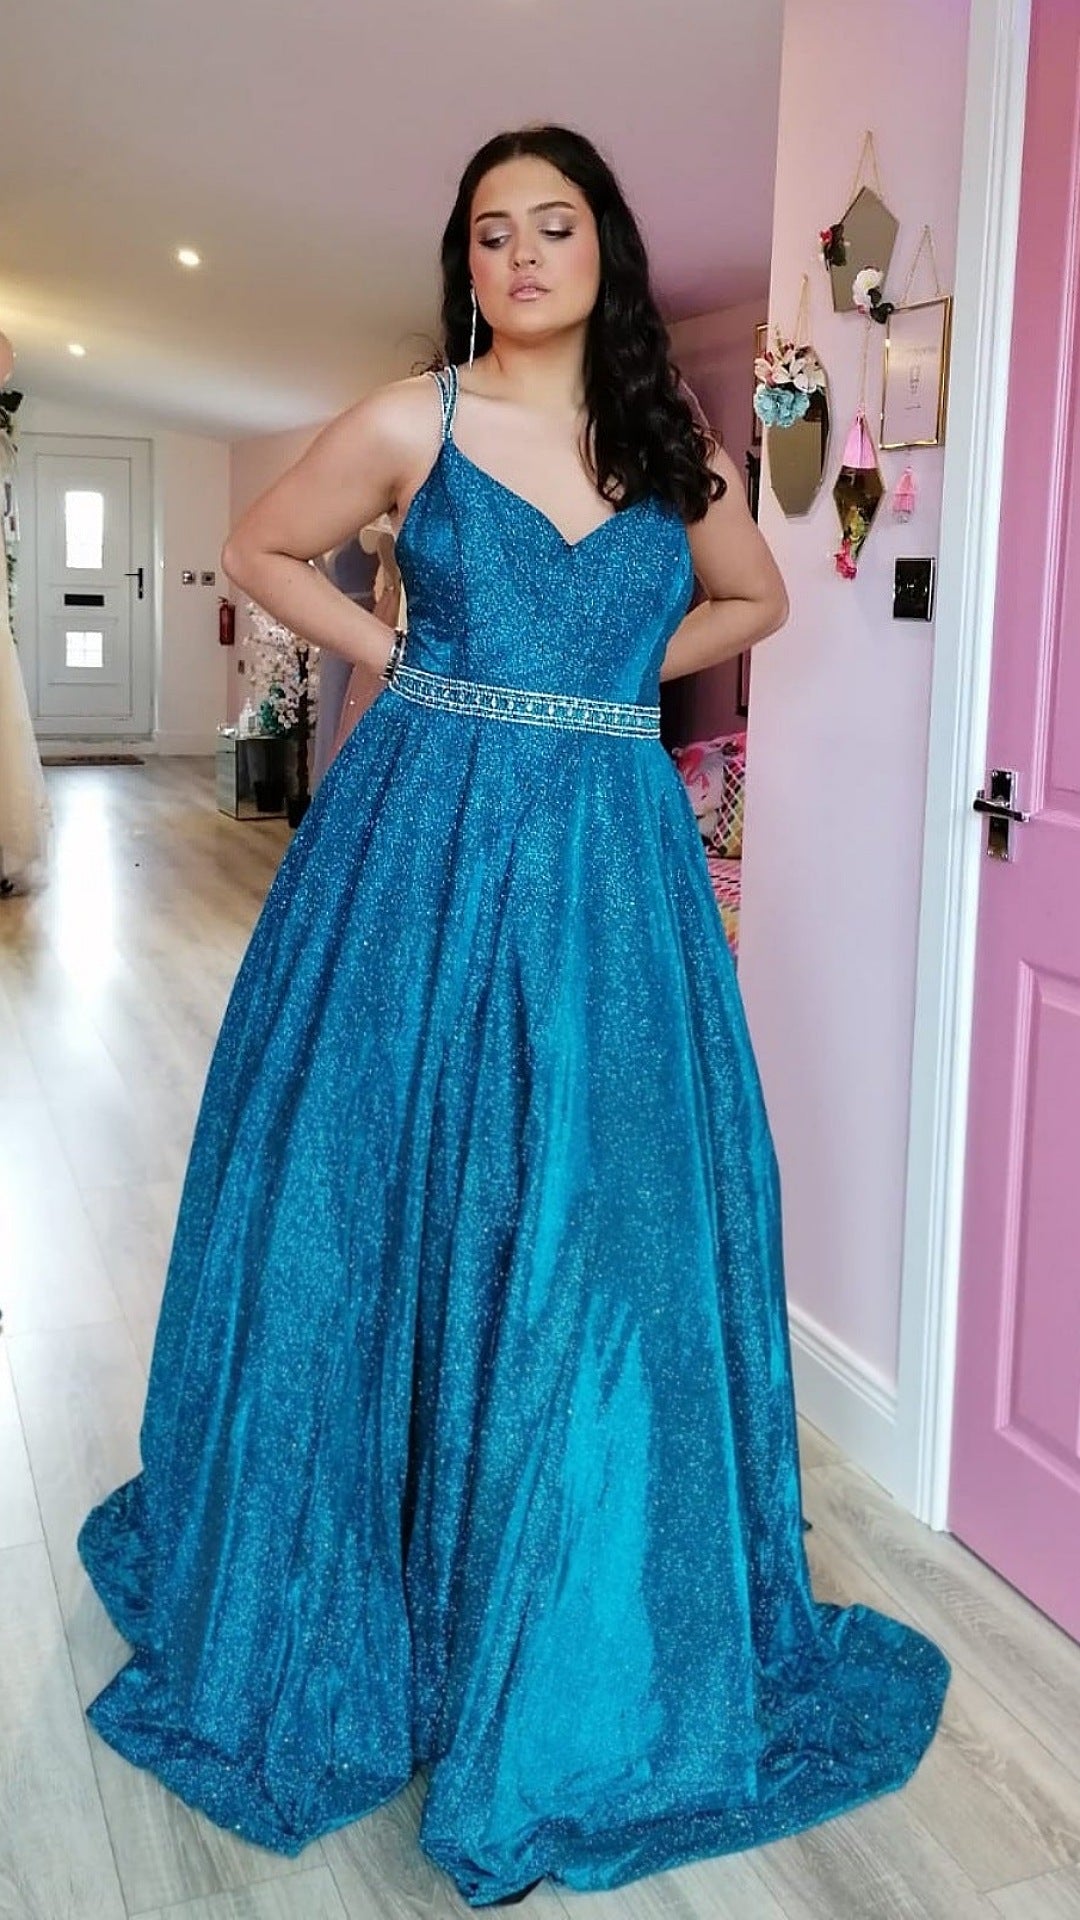 Alexa Blue Sparkle Skinny Strapped Ball gown Formal Prom Dress